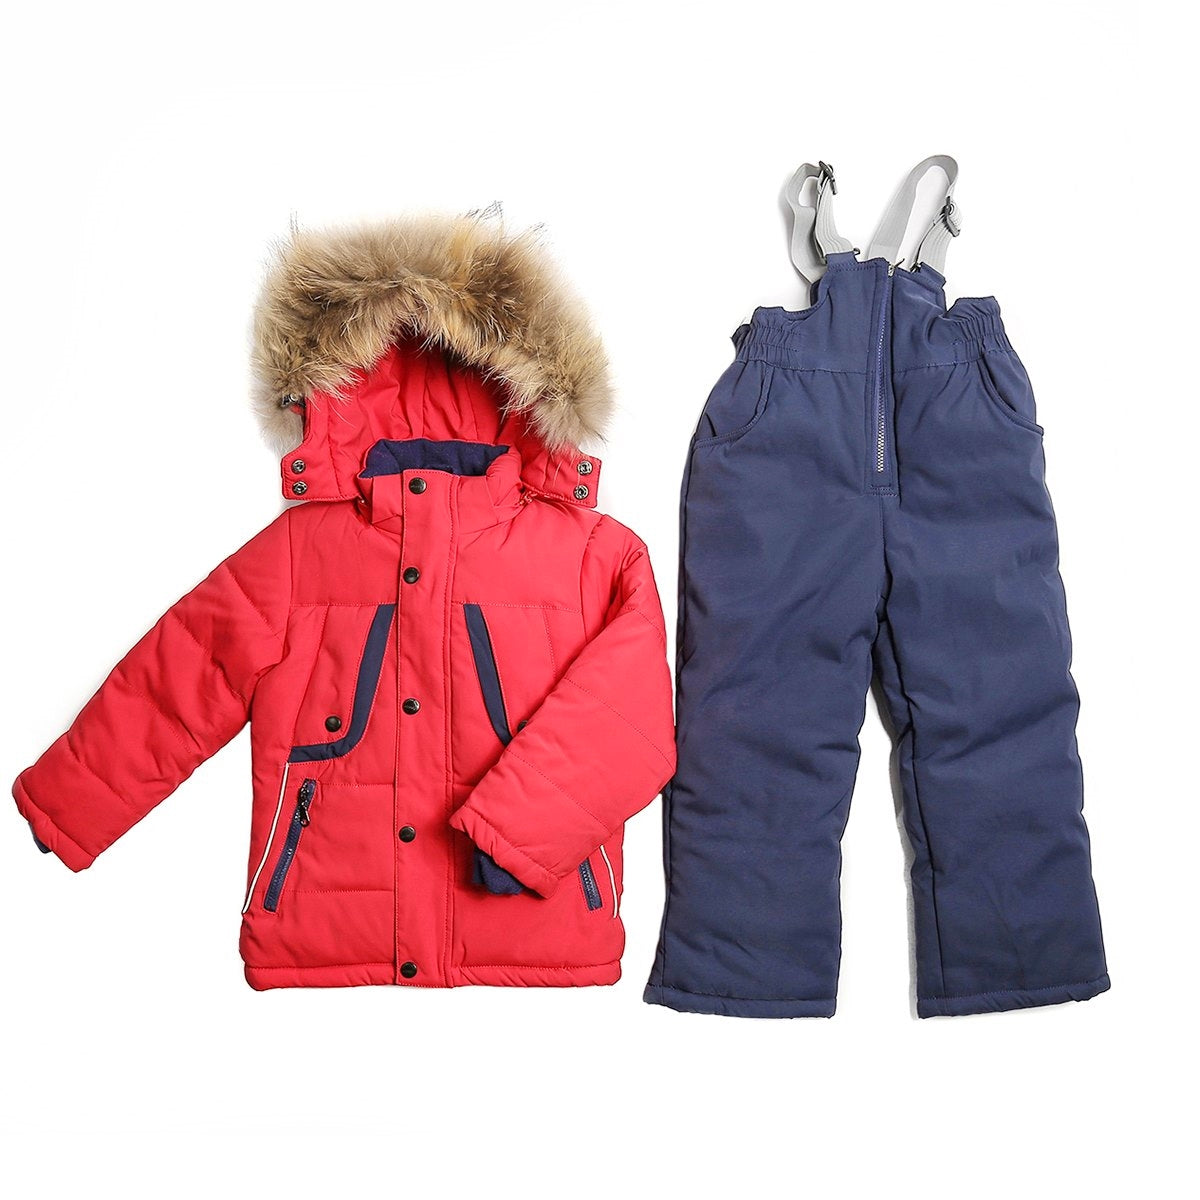 Only 45.00 usd for Toddler Boys 3-Piece Winter Stylish Jacket